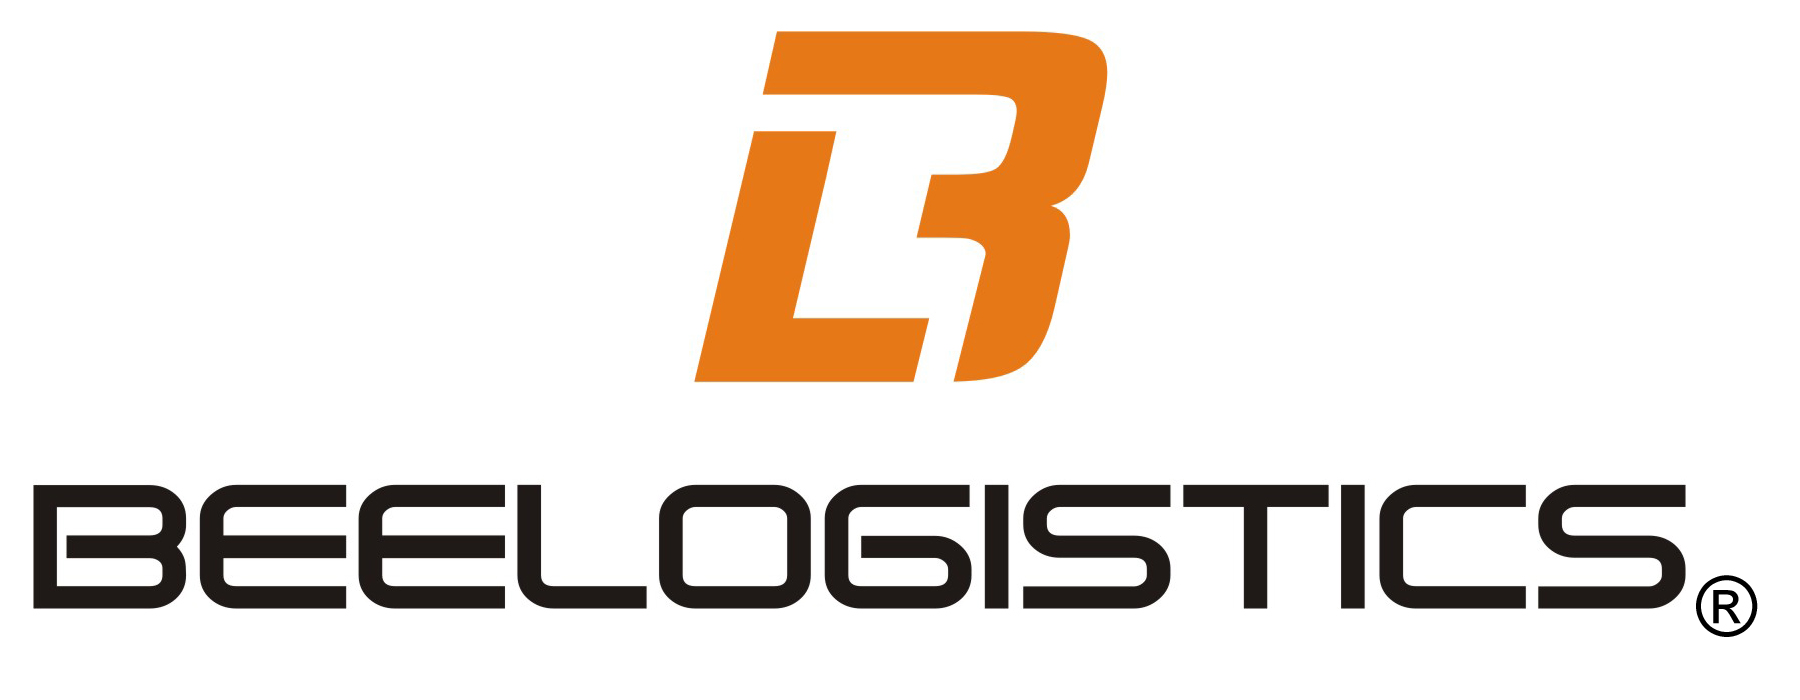 Bee Logistic